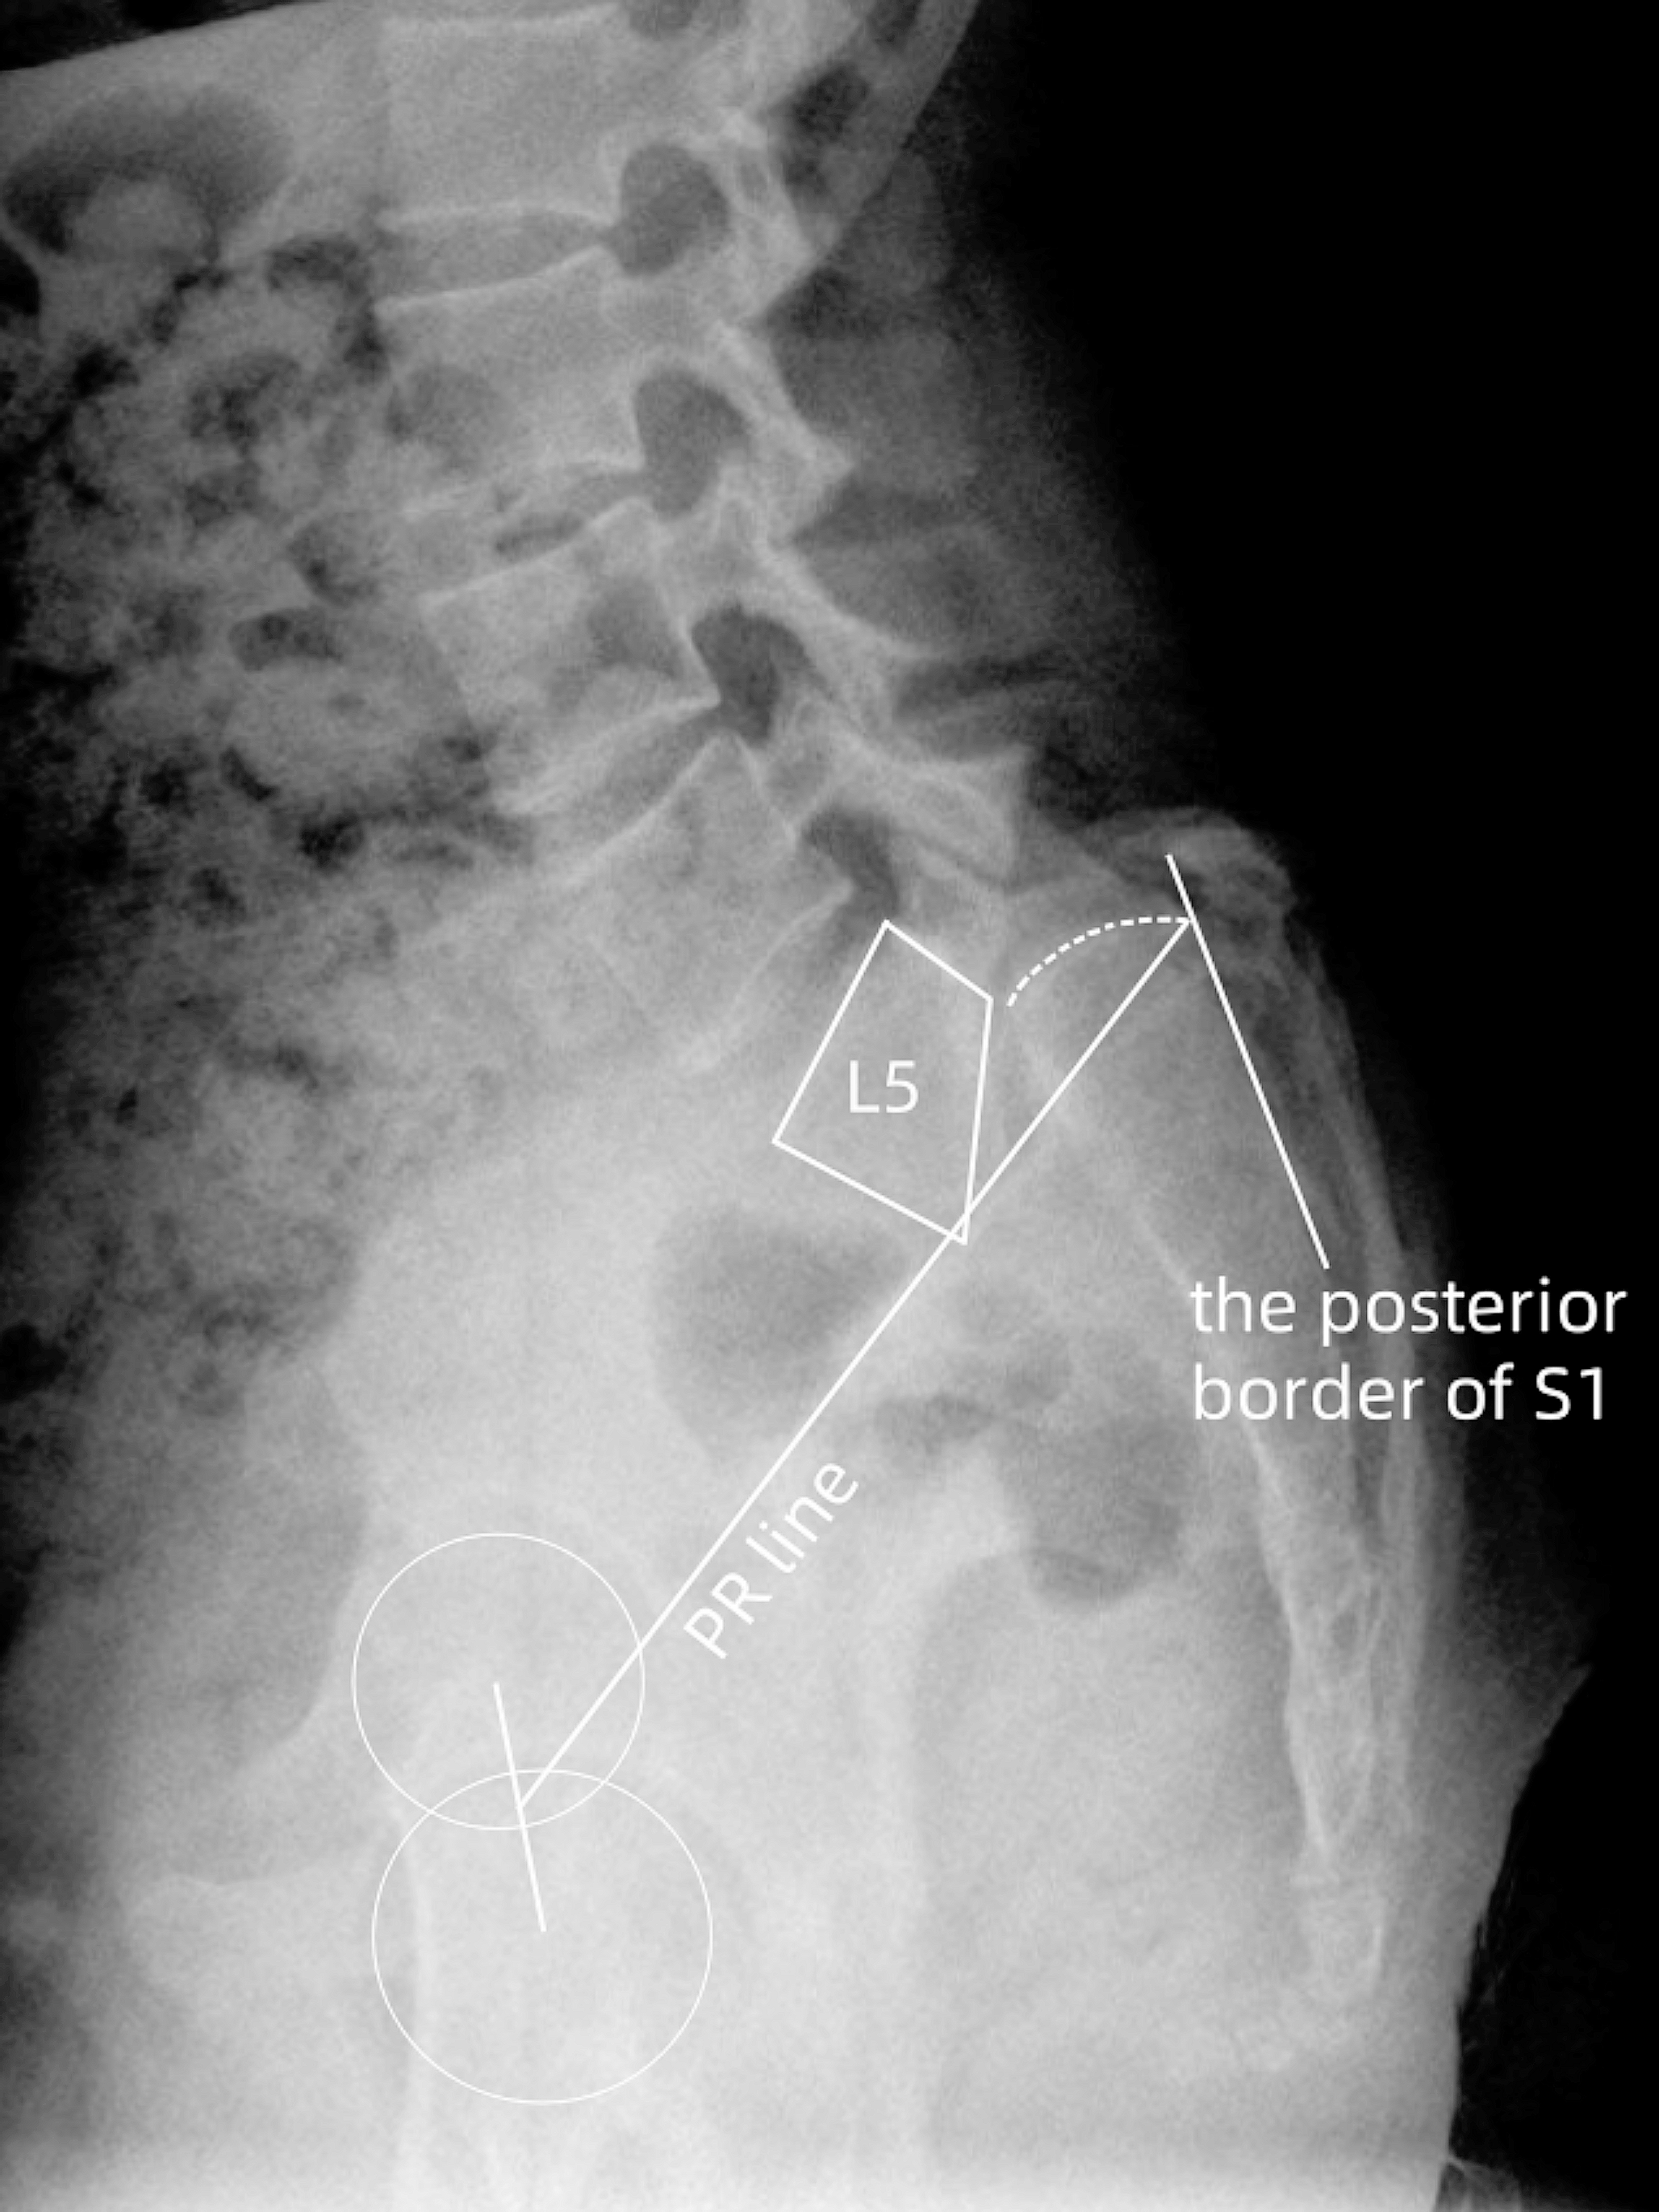 Evaluation of the effectiveness of the femoro-sacral posterior angle system for measuring spino-pelvic morphology in high-dysplastic developmental spondylolisthesis